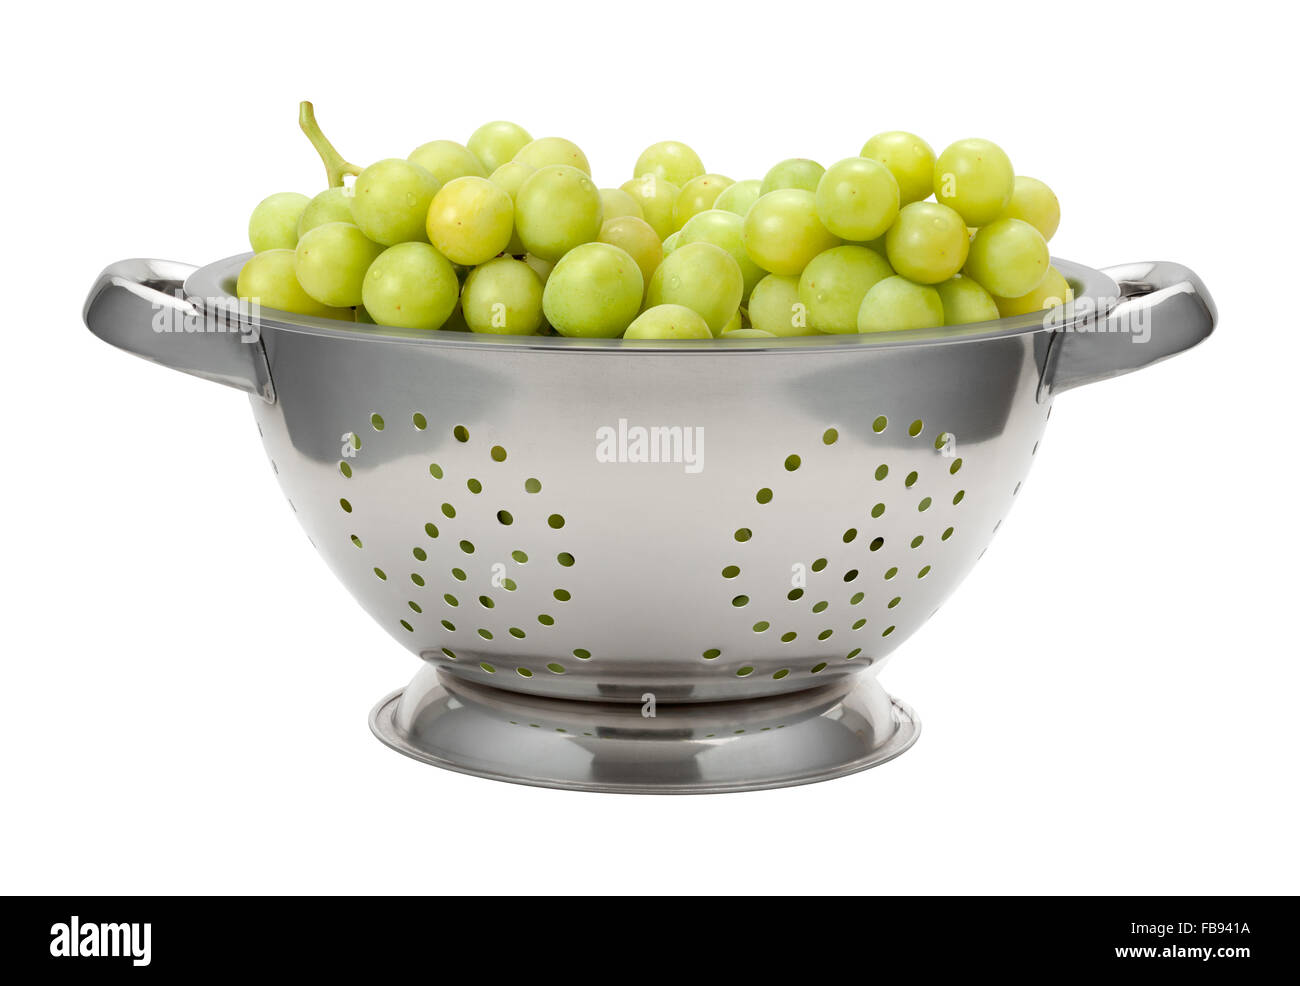 White Grapes in a stainless steel Colander Stock Photo